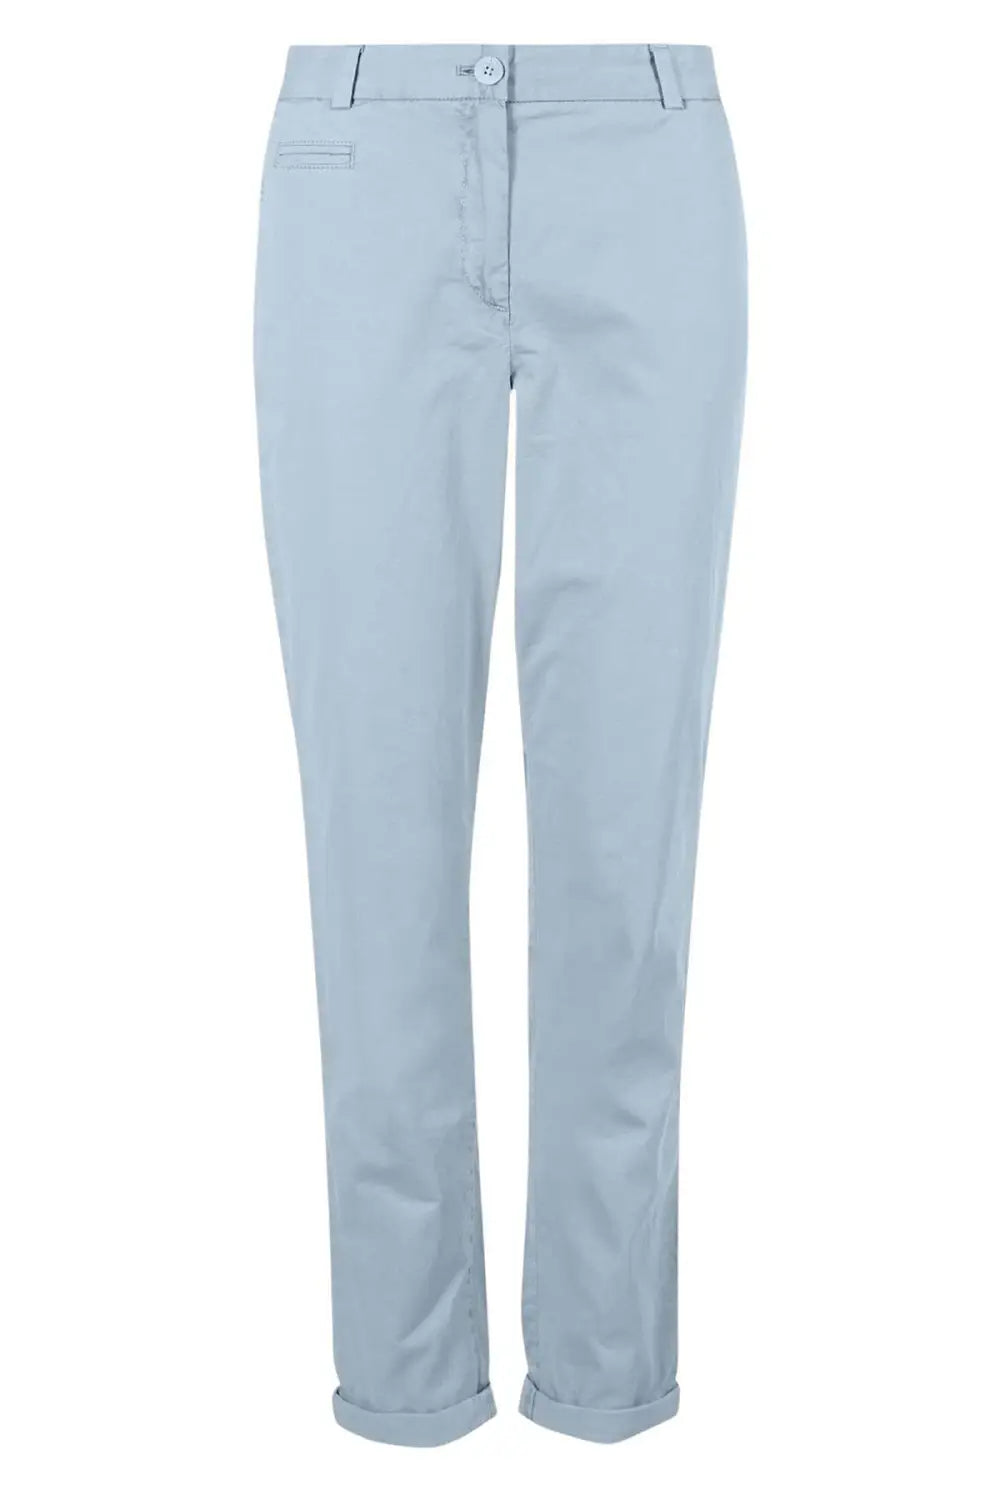 M&S Womens Coloured Chino Trousers